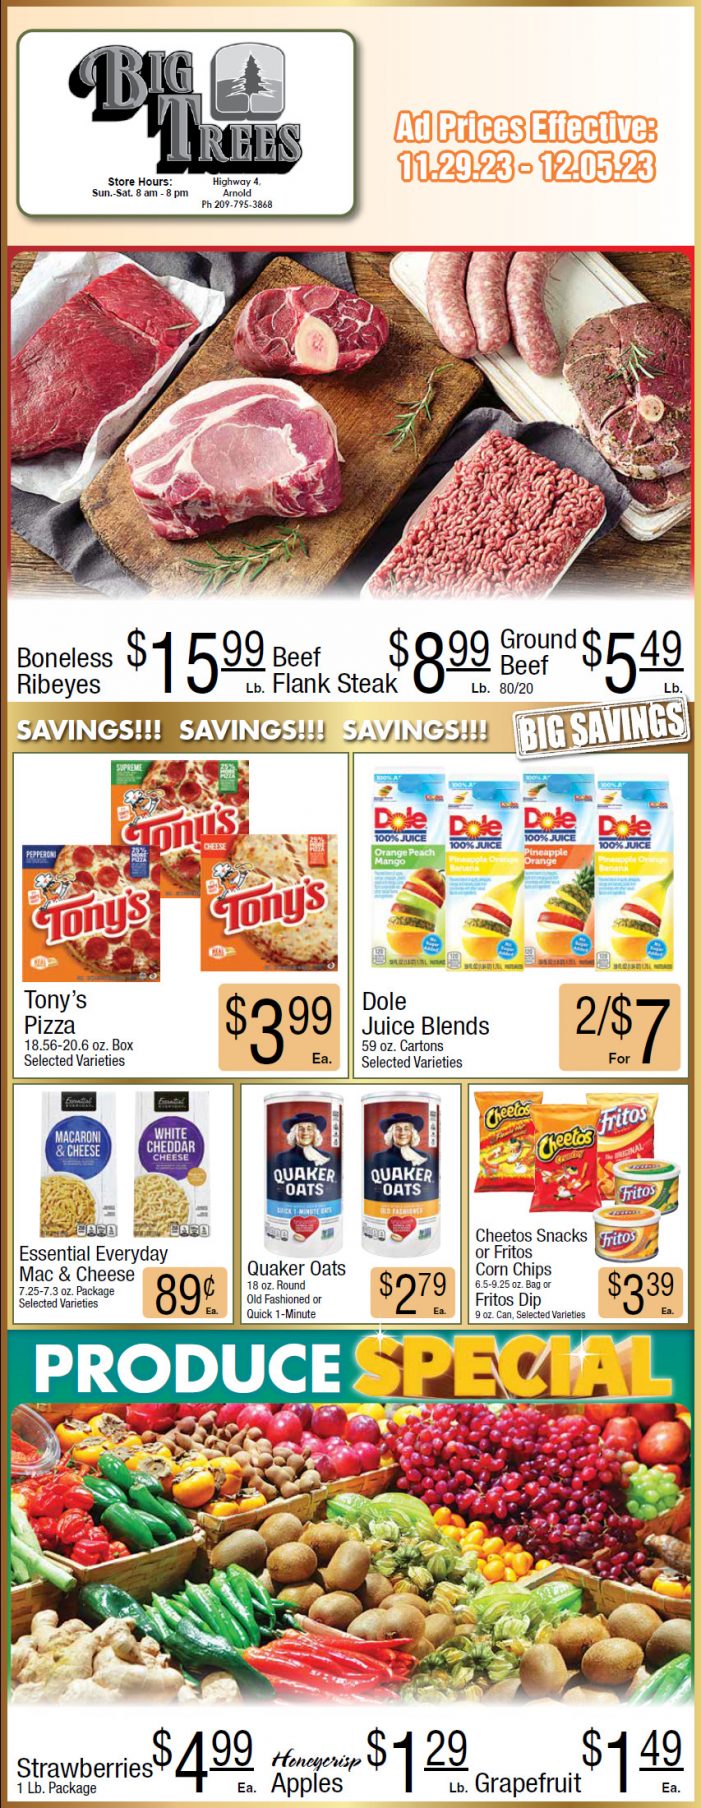 Big Trees Market Weekly Ad, Grocery, Produce, Meat & Deli Specials Through December 5th! Shop Local & Save!